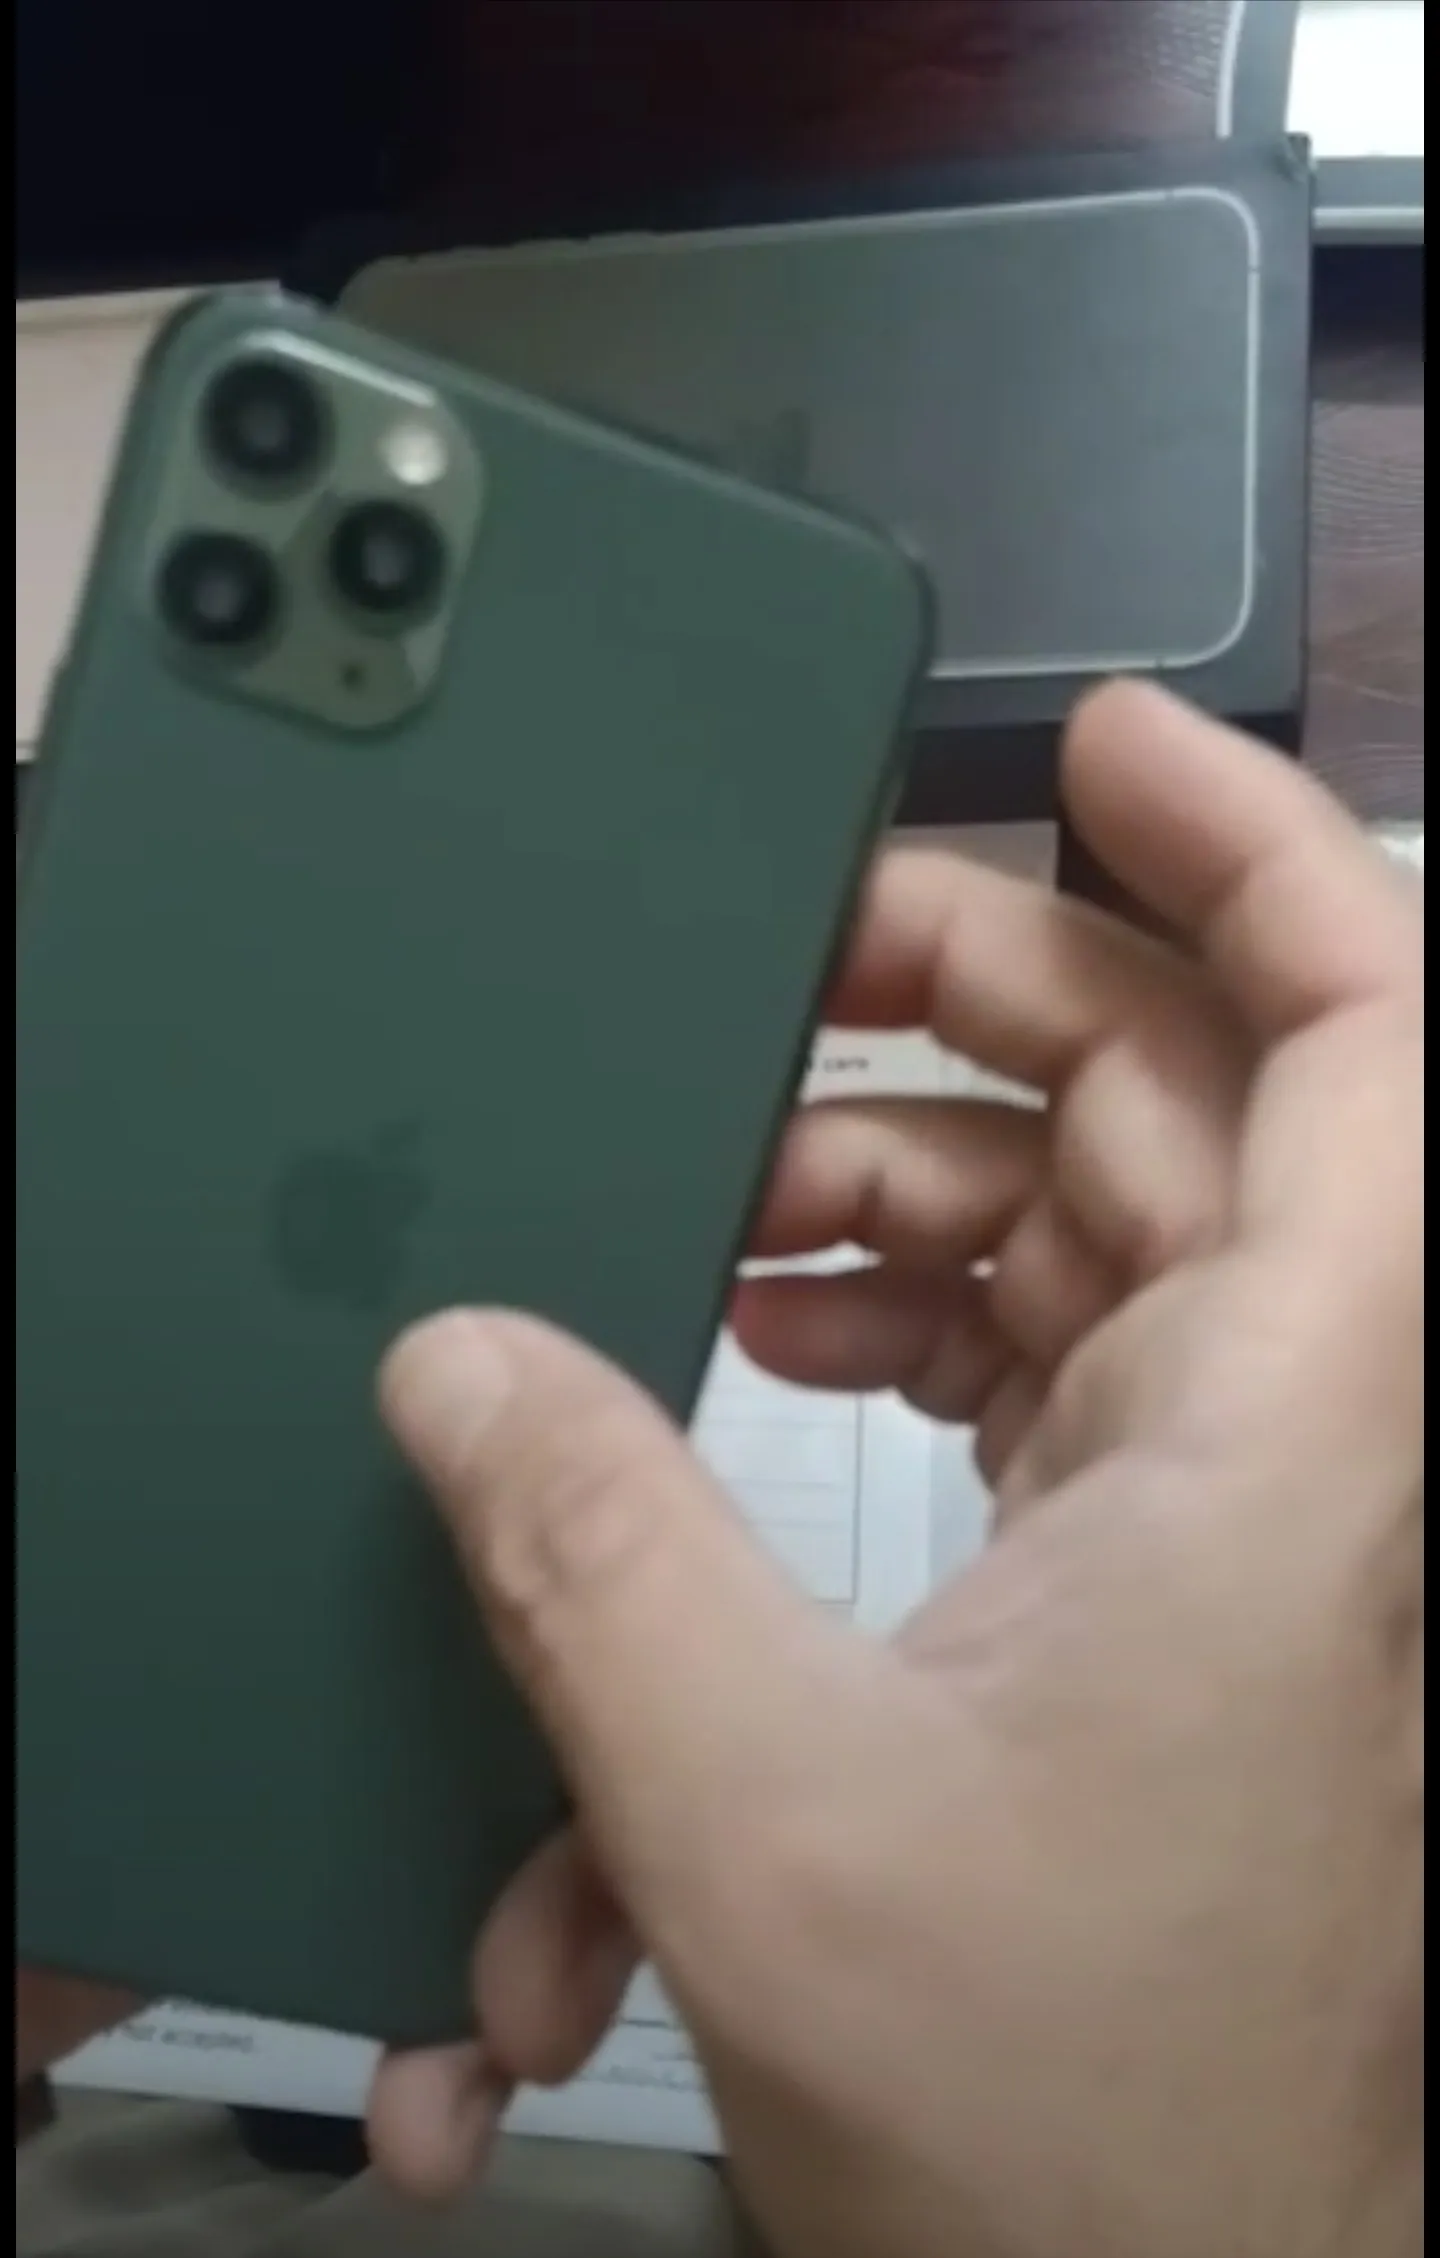 Offer for karachi users iphone 11 and 12 pro max turkish made ramazn offer - photo 1